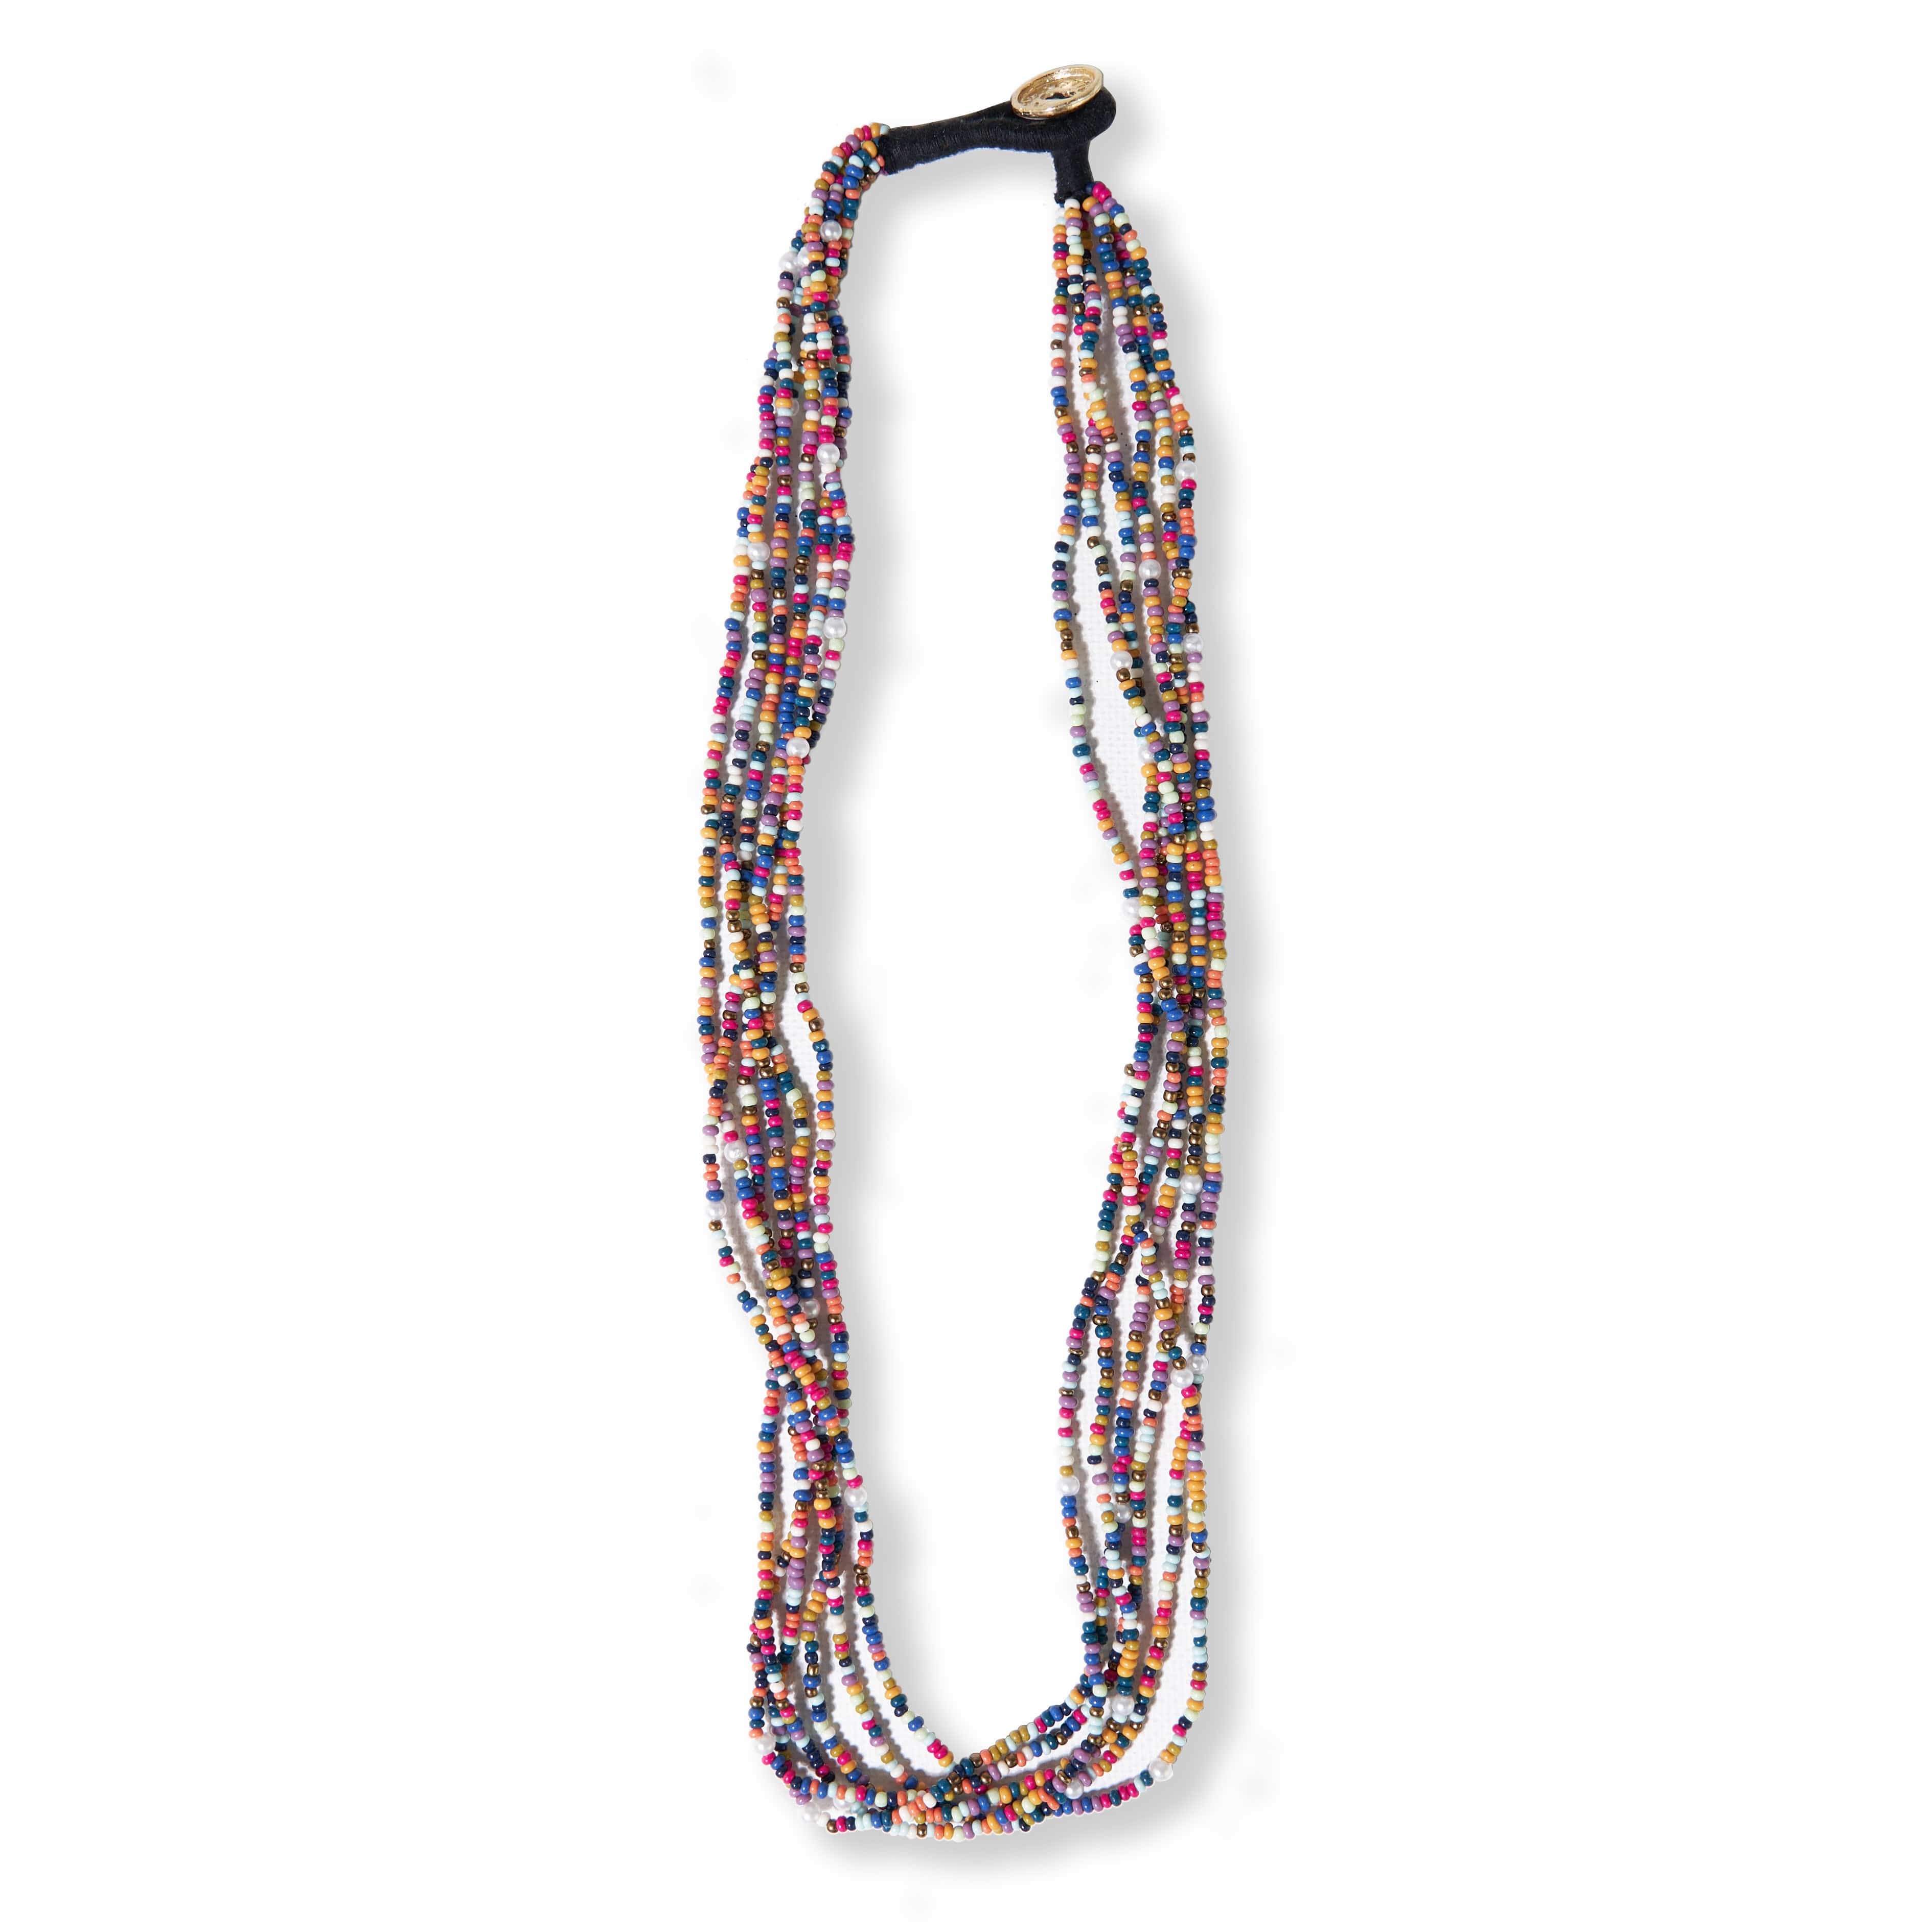 COLORFUL MIX BEADED NECKLACE | THERAPY STORES – Therapy Stores